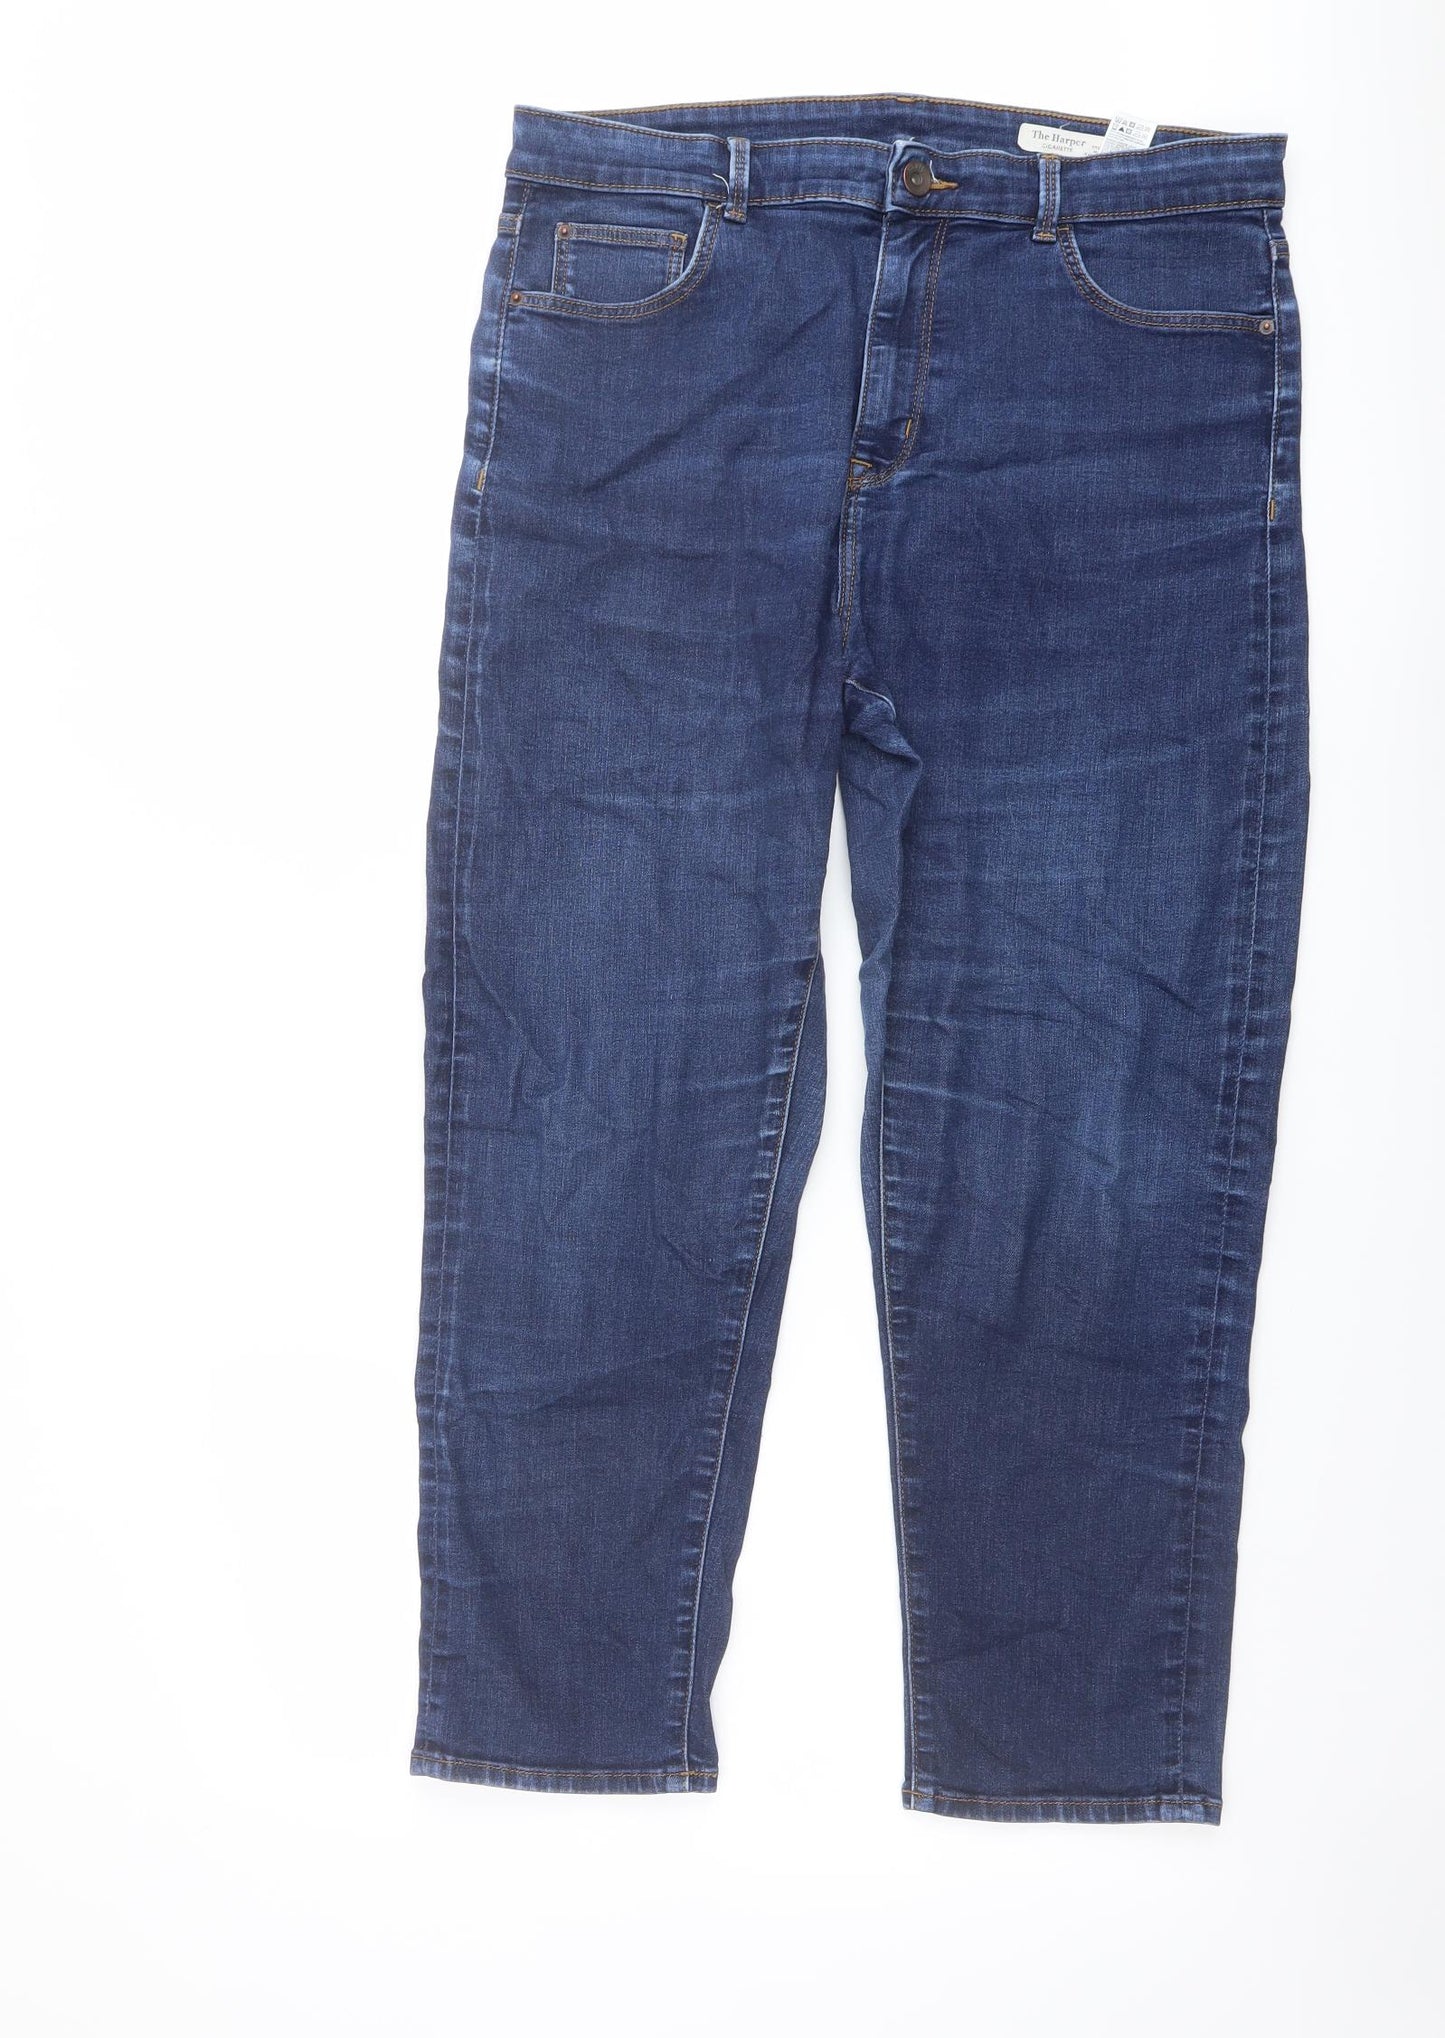 Marks and Spencer Womens Blue Cotton Straight Jeans Size 16 L26 in Regular Button